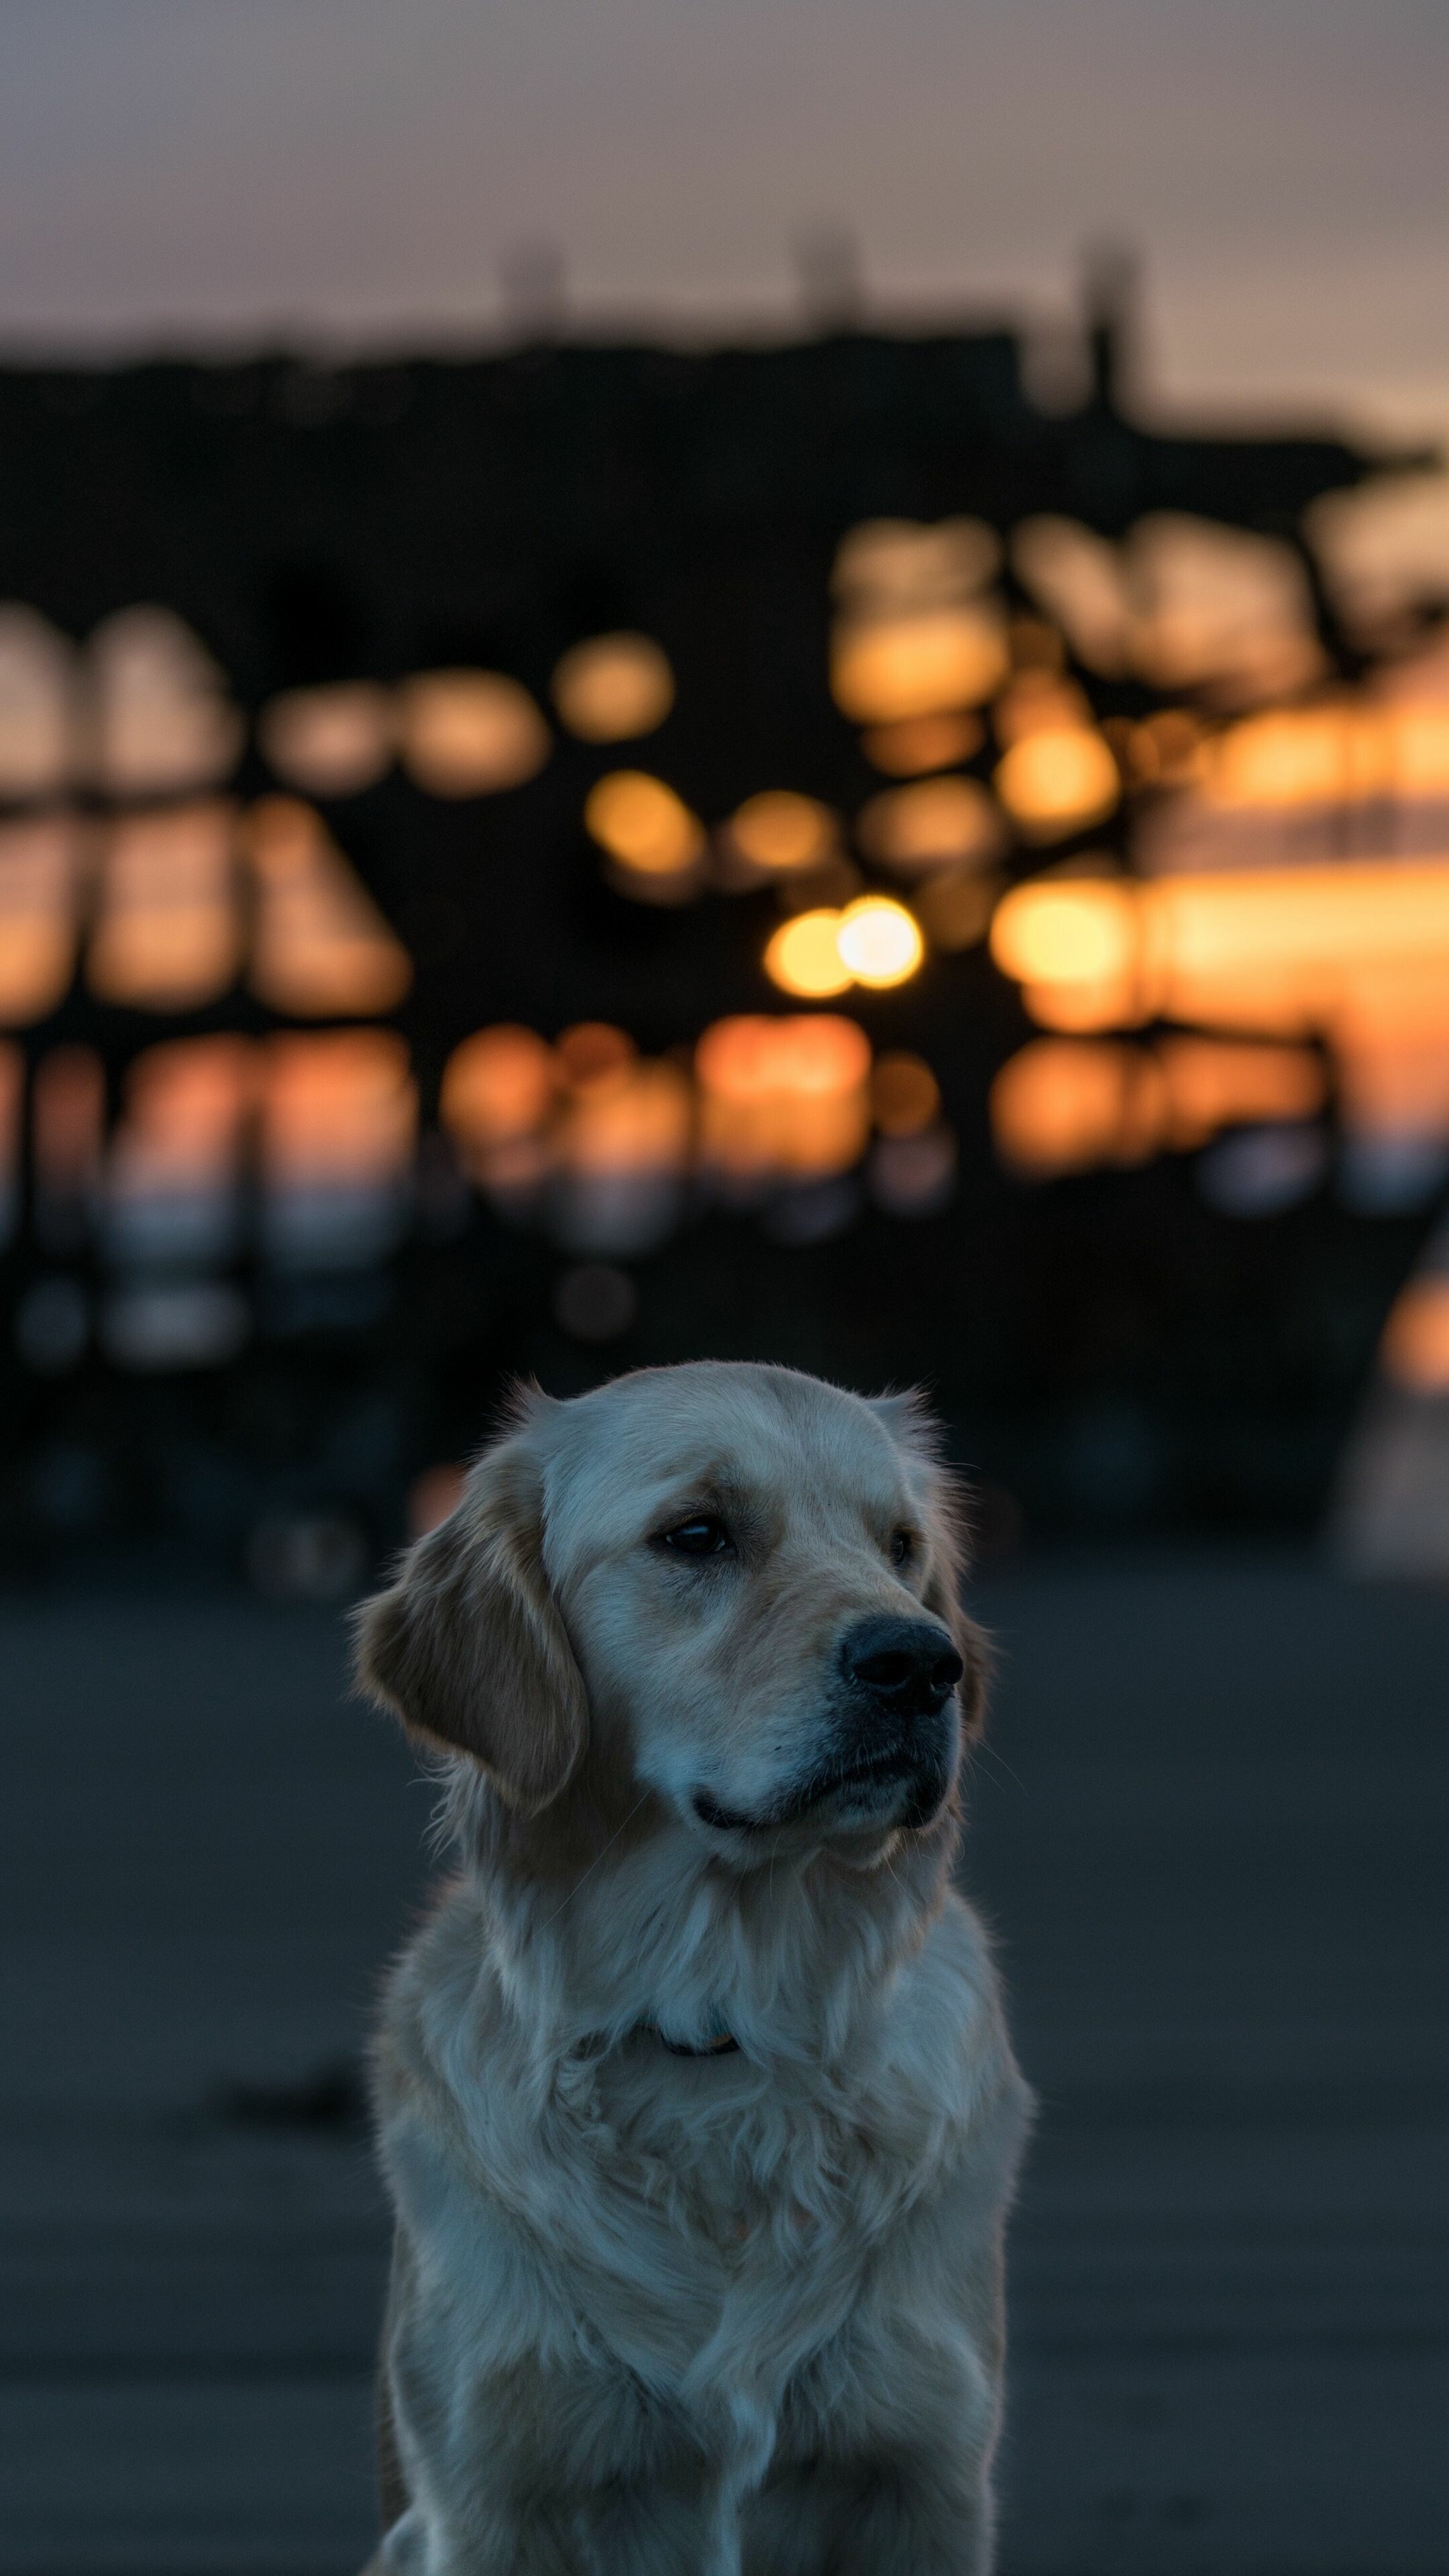 Golden Retriever: A sturdy, muscular dog of medium size, famous for the dense, lustrous coat of gold that gives the breed its name. 2160x3840 4K Background.